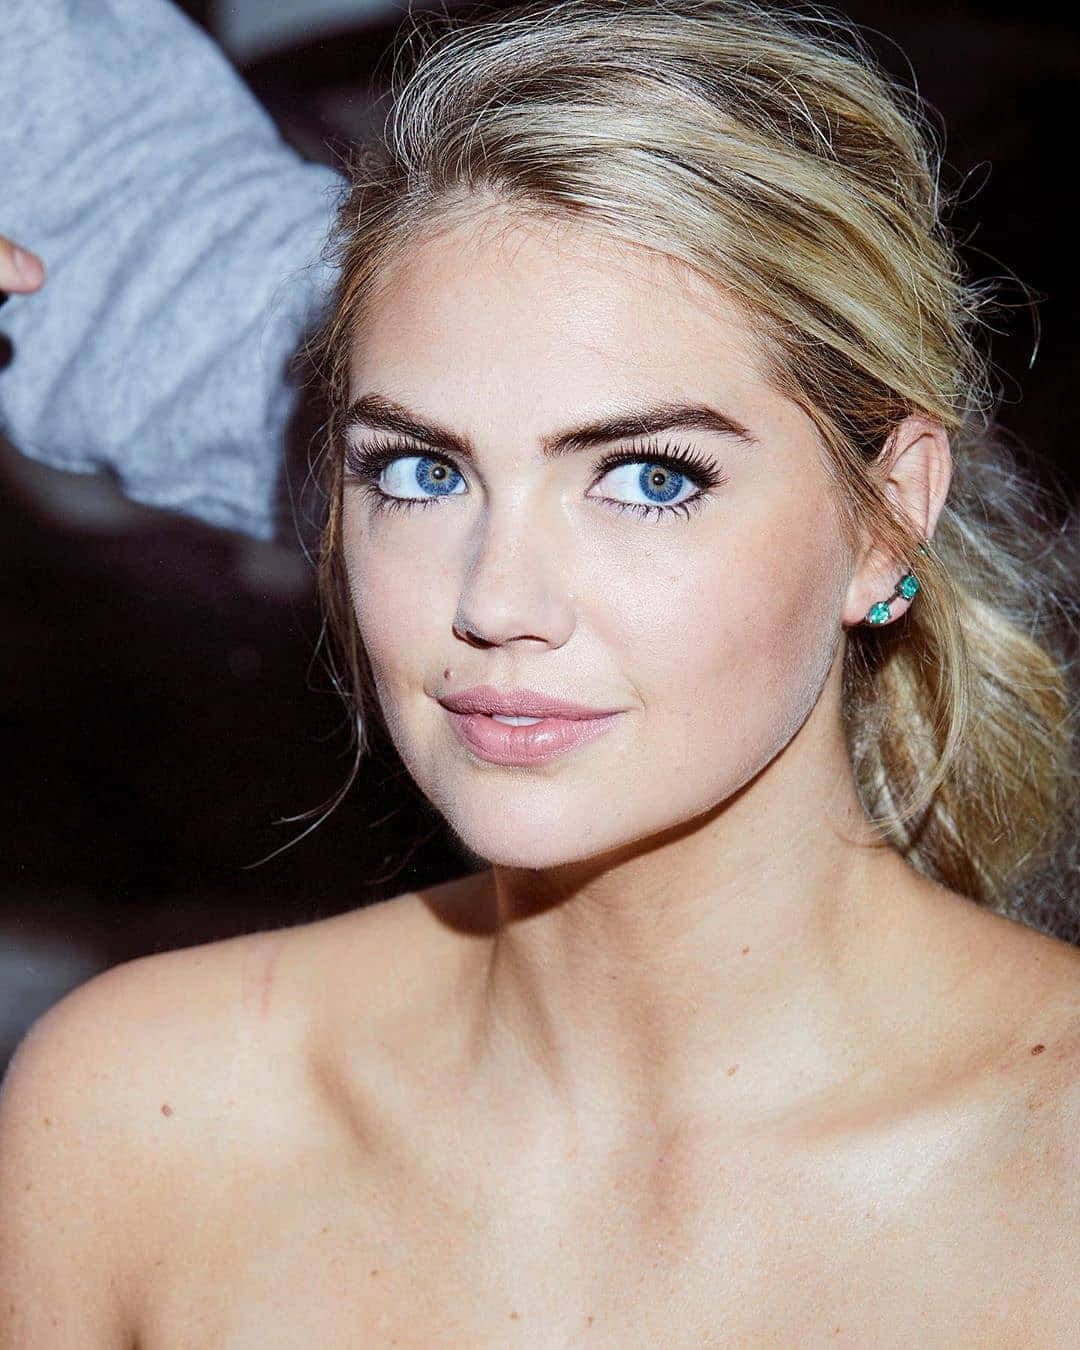 Kate Upton – An All-american Beauty Background